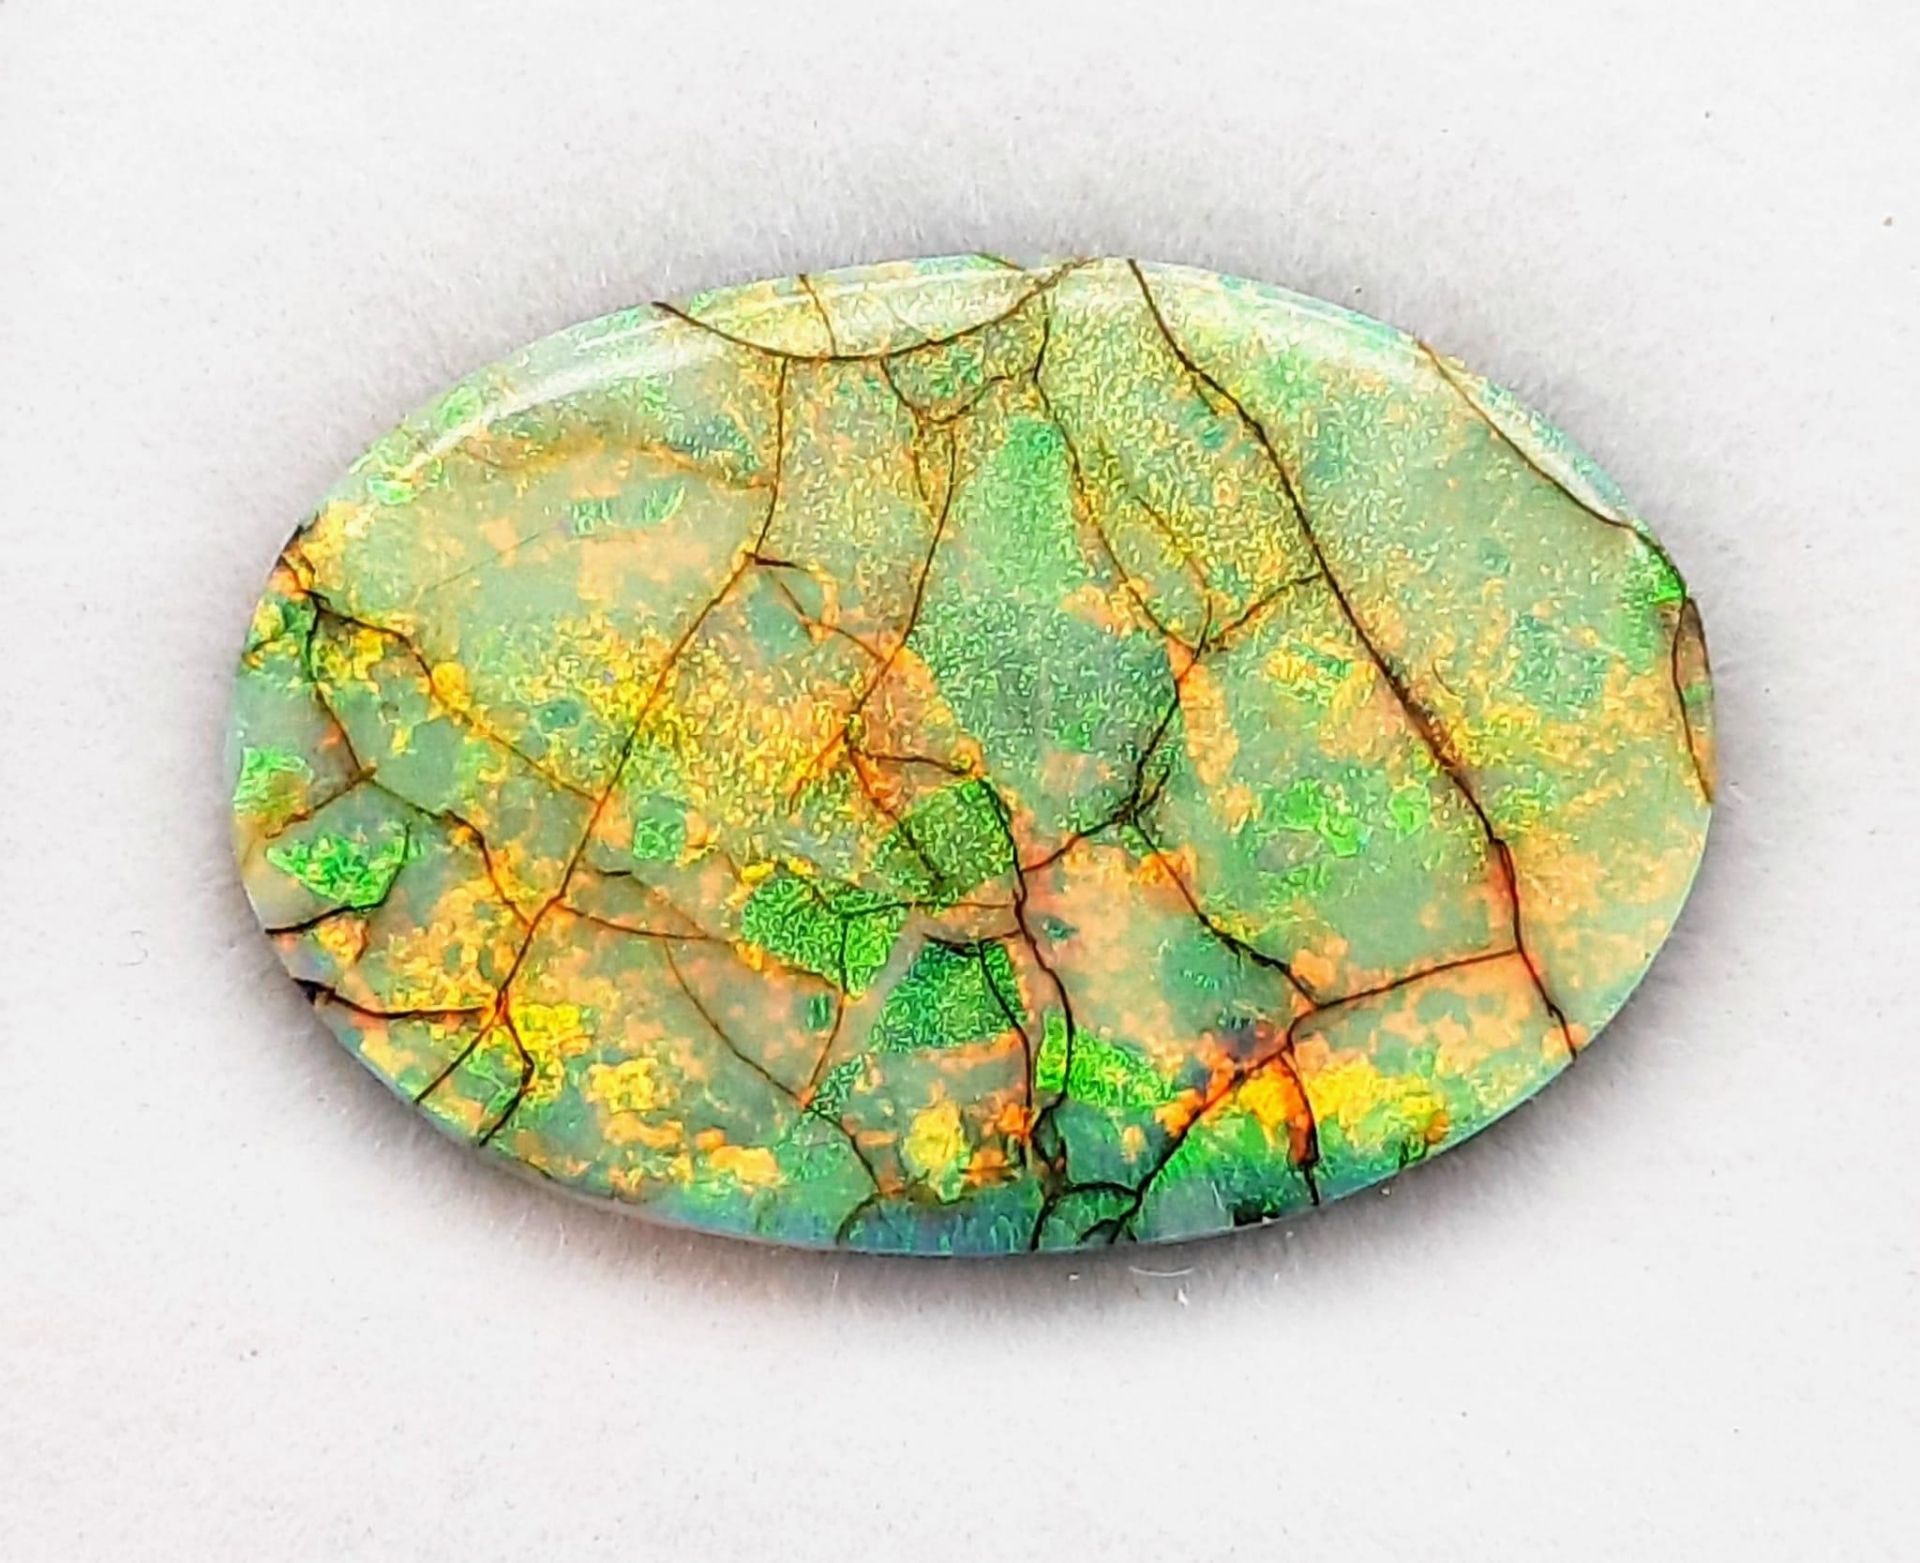 A beautiful MONARCH OPAL with strong iridescence on both sides of the oval shaped stone. Weight: 9.8